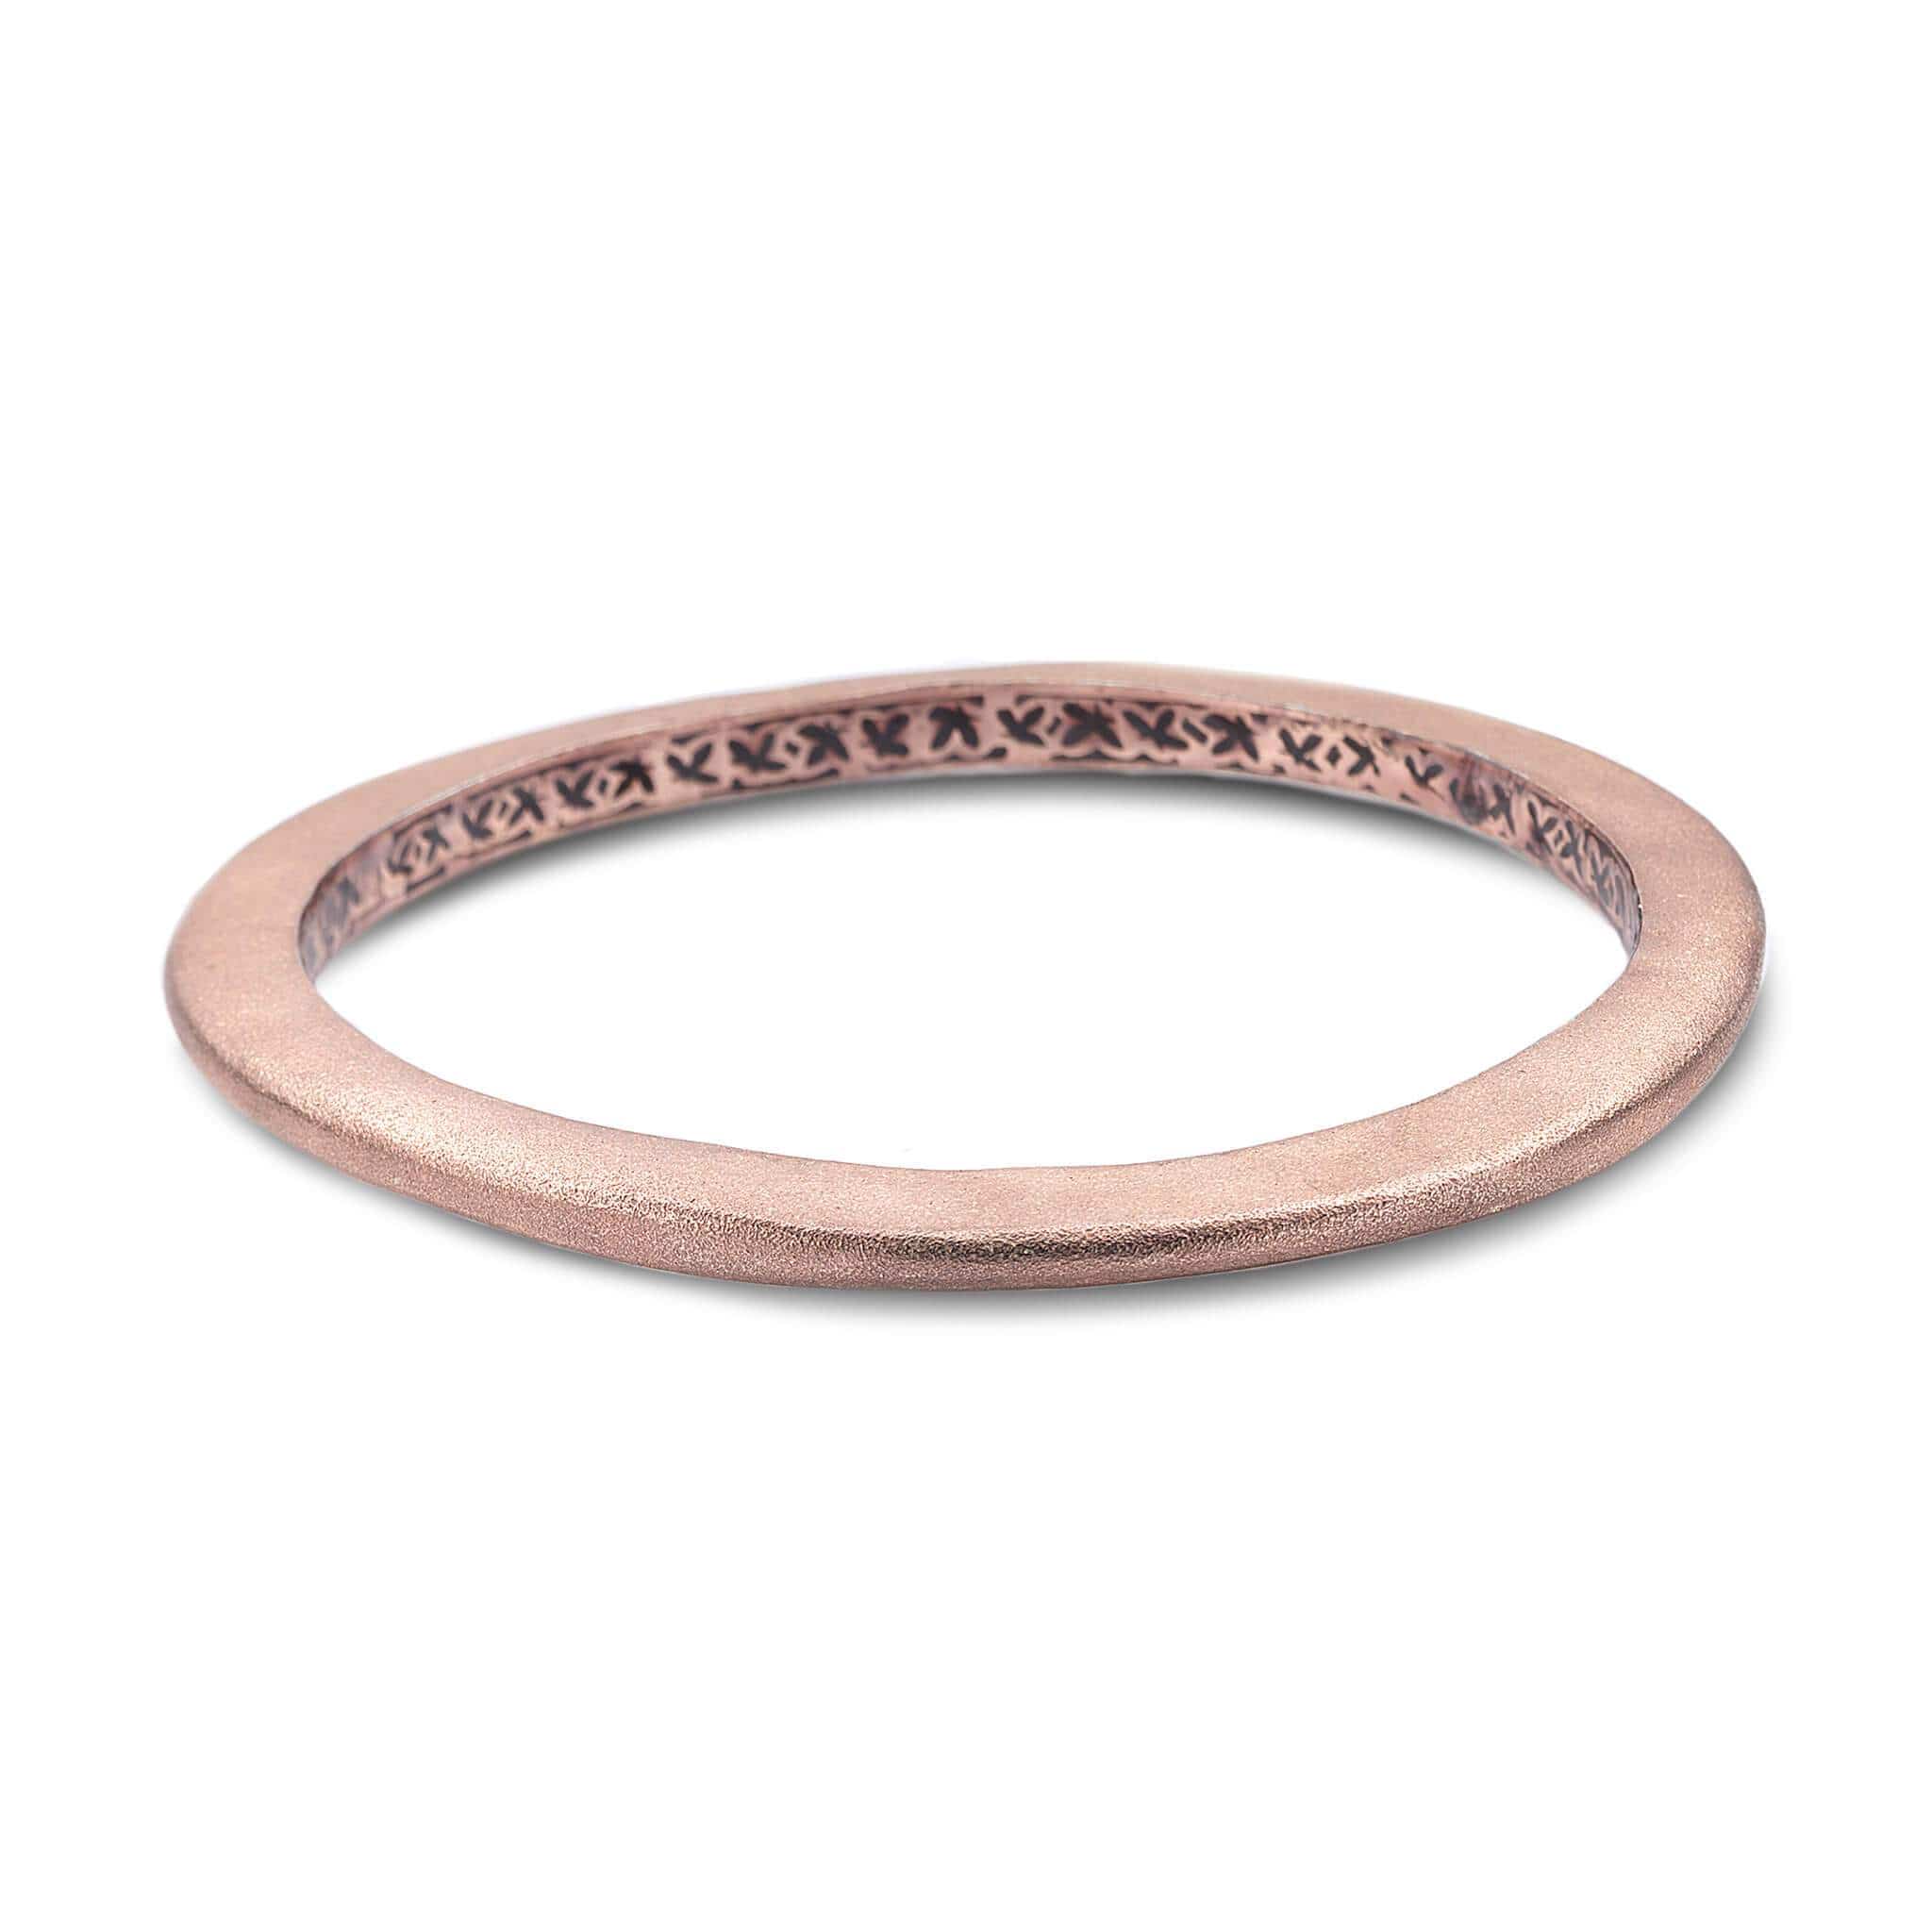 Tribal rose gold plated wave bangle 5mm thickness - Coomi